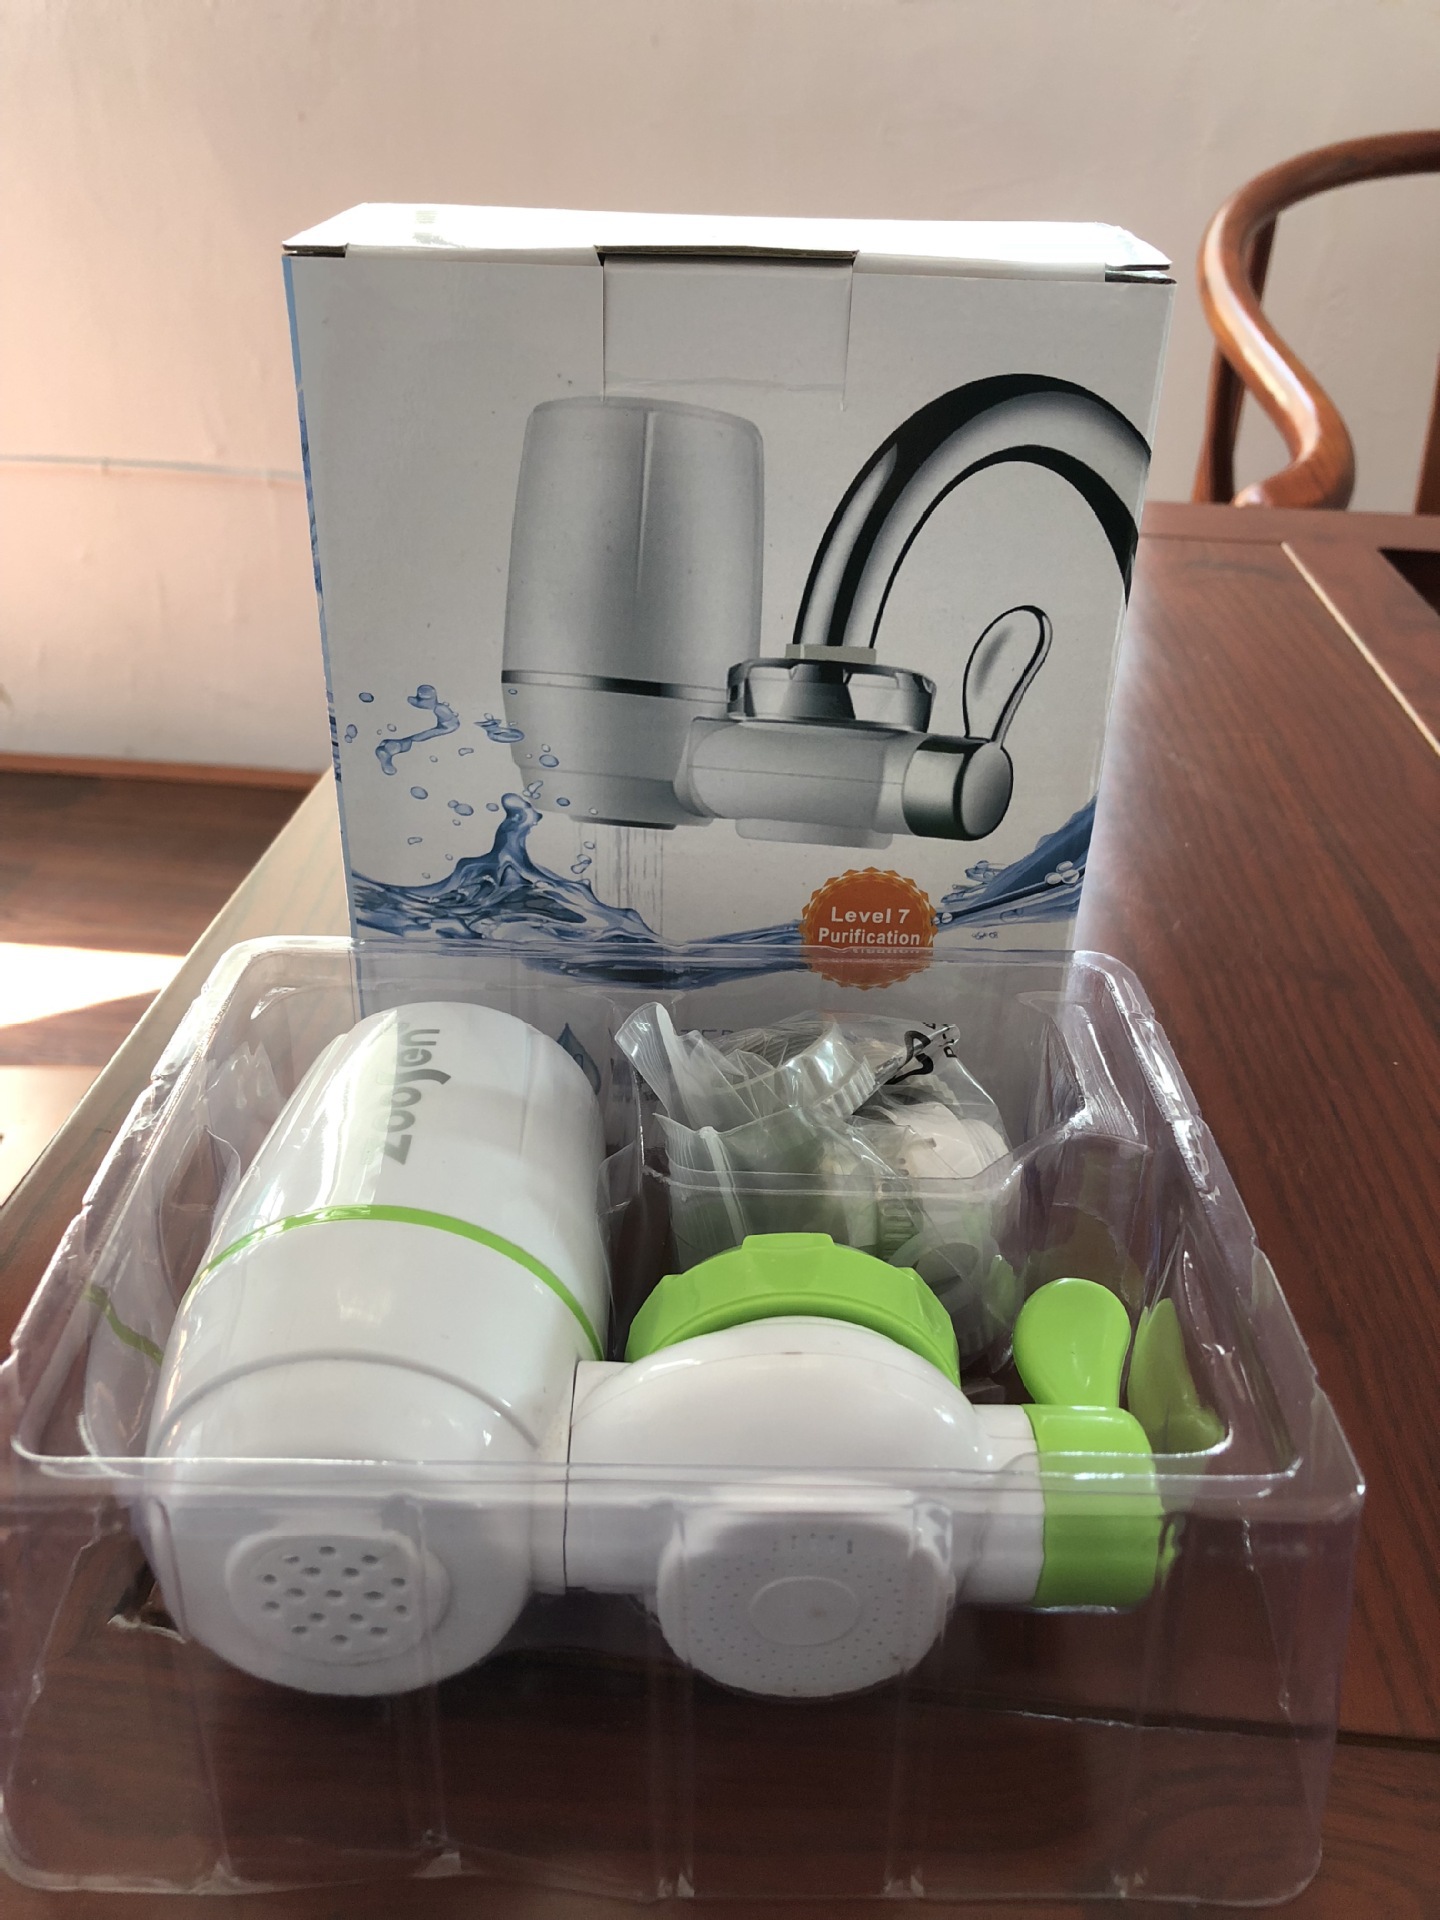 Cross Mirror Direct Supply Household Faucet Water Purifier Kitchen Tap Water Level 7 Filter Gift Water Purifier in Stock Wholesale